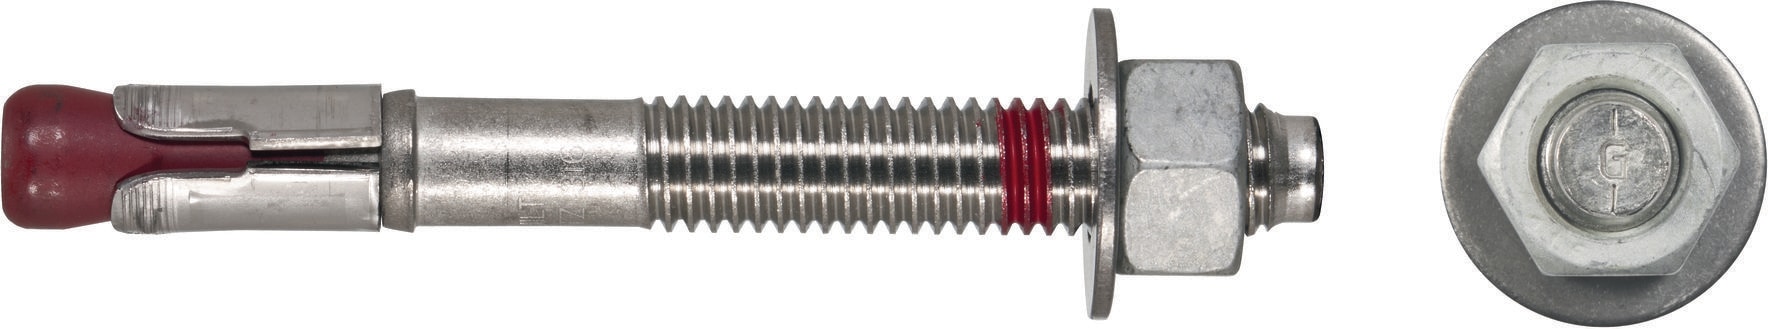 Hilti KWIK Bolt TZ Expansion Anchor Box of 160 304 Stainless Steel KB-TZ 1/2 x 5-1/2-3436008 